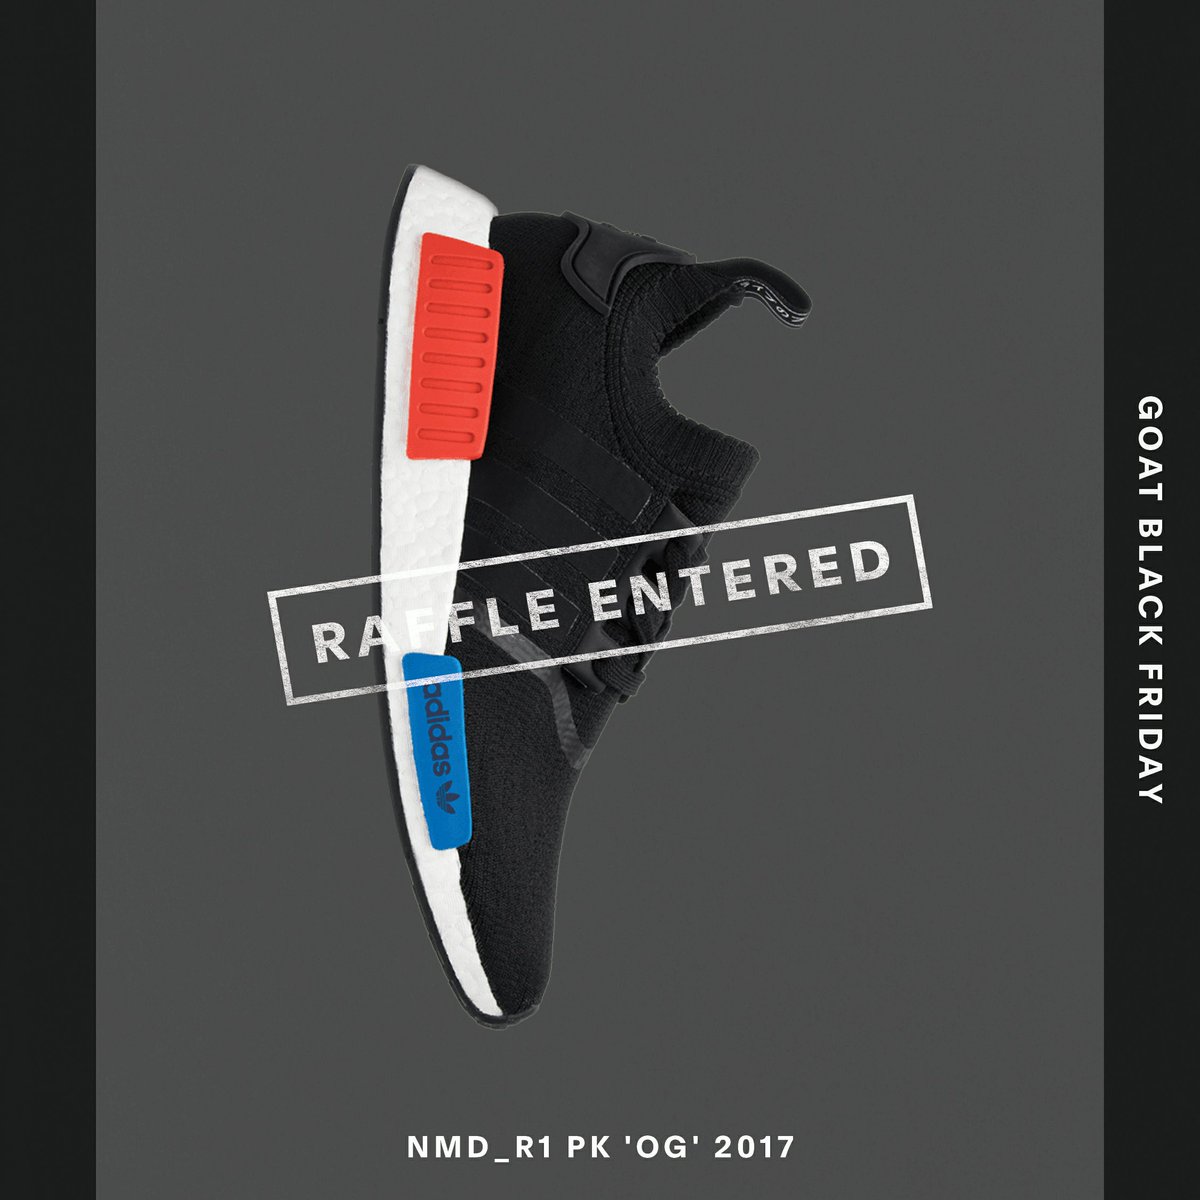 Enter the #GOATBlackFriday Raffle for your chance to win the most coveted sneakers and other prizes. @goatapp goat.app.link/SNZq02WNSR